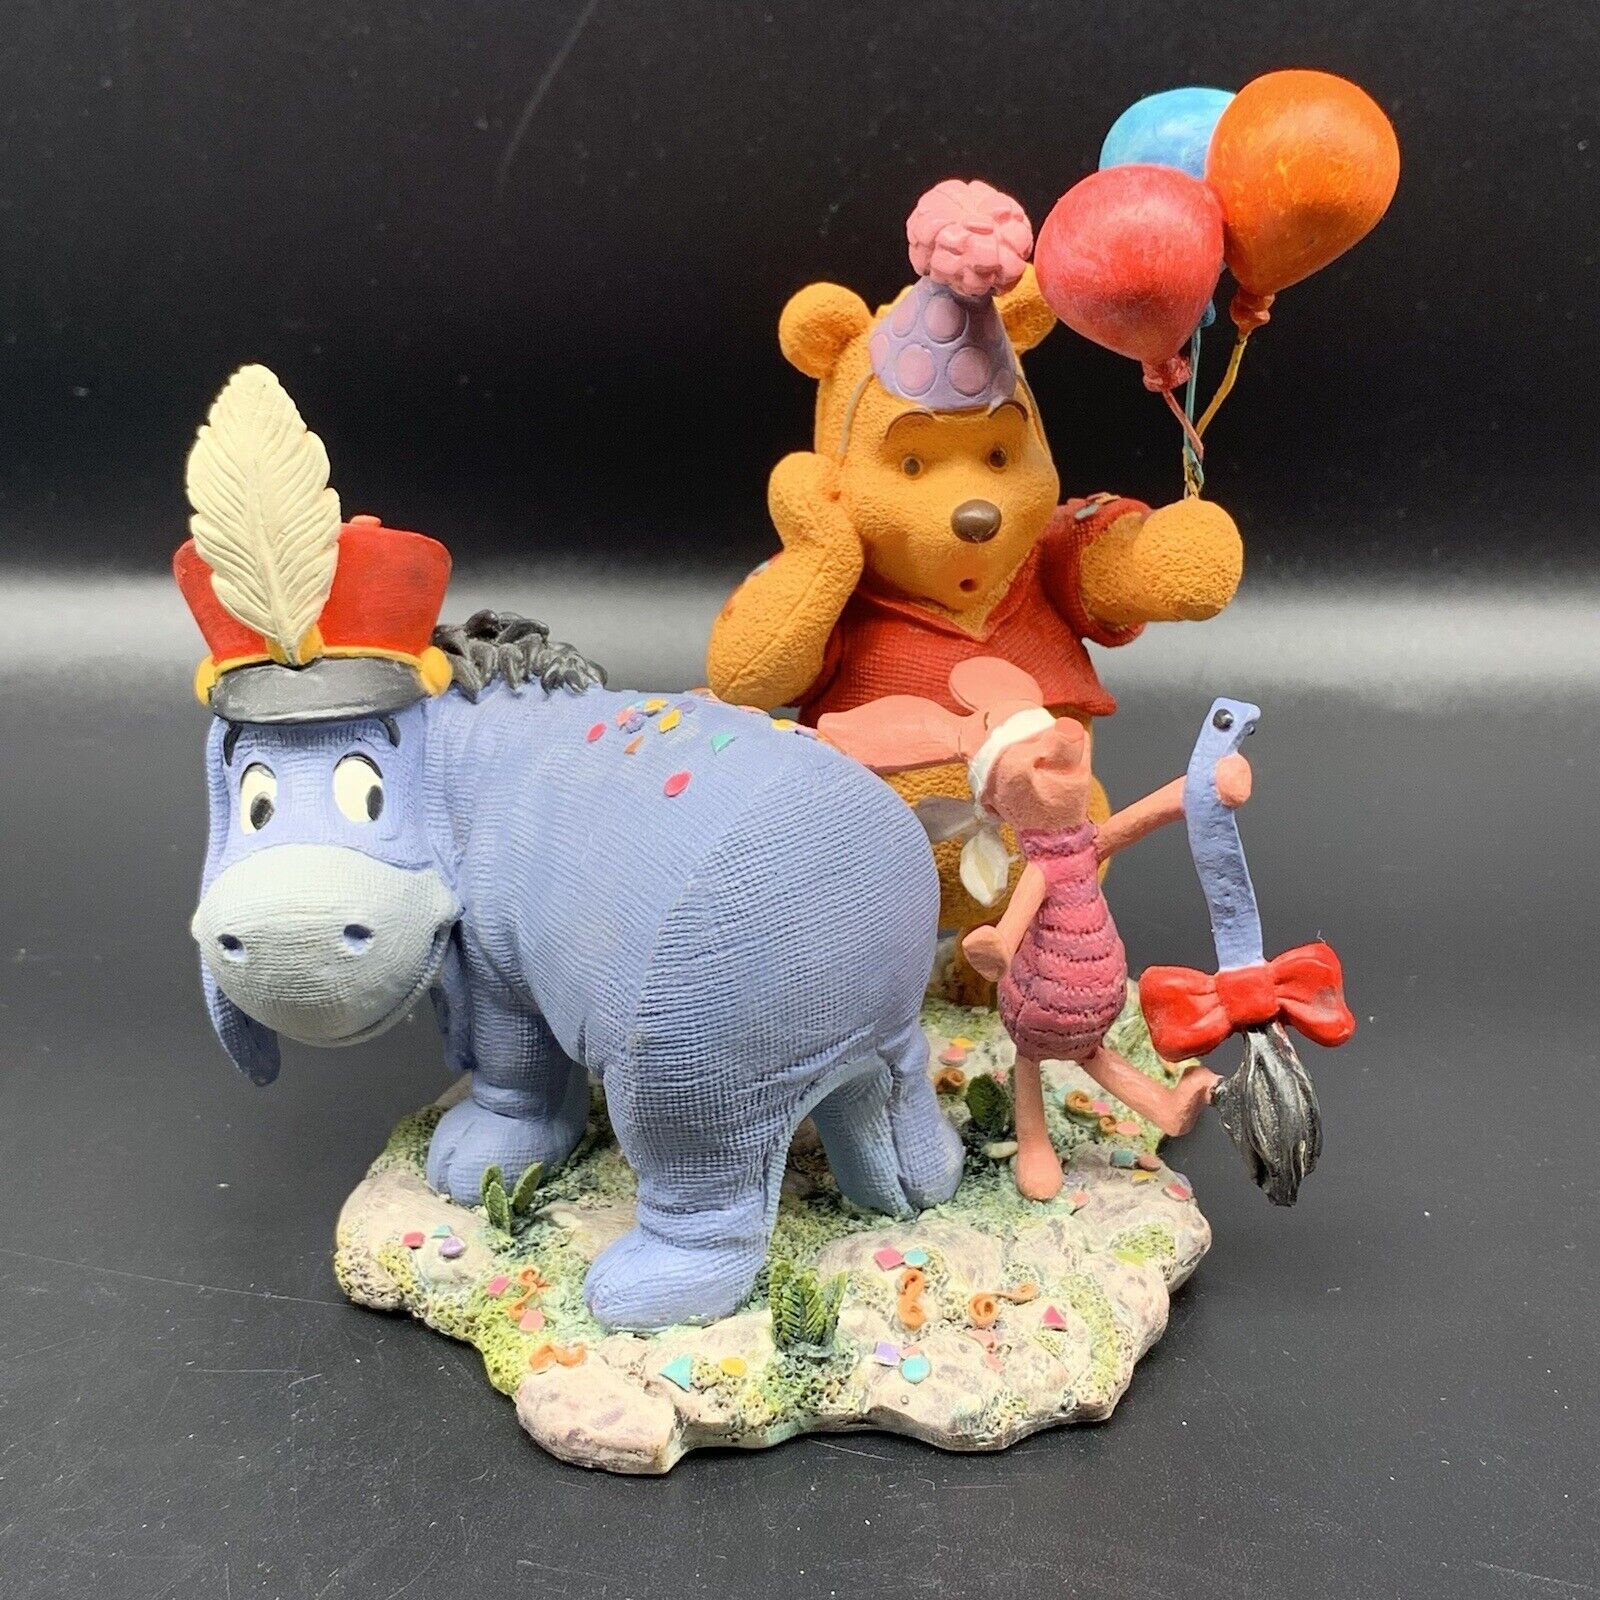 Simply Pooh RETIRED “Wishing You Birthday Merriment and Such” Figurine 4.5”